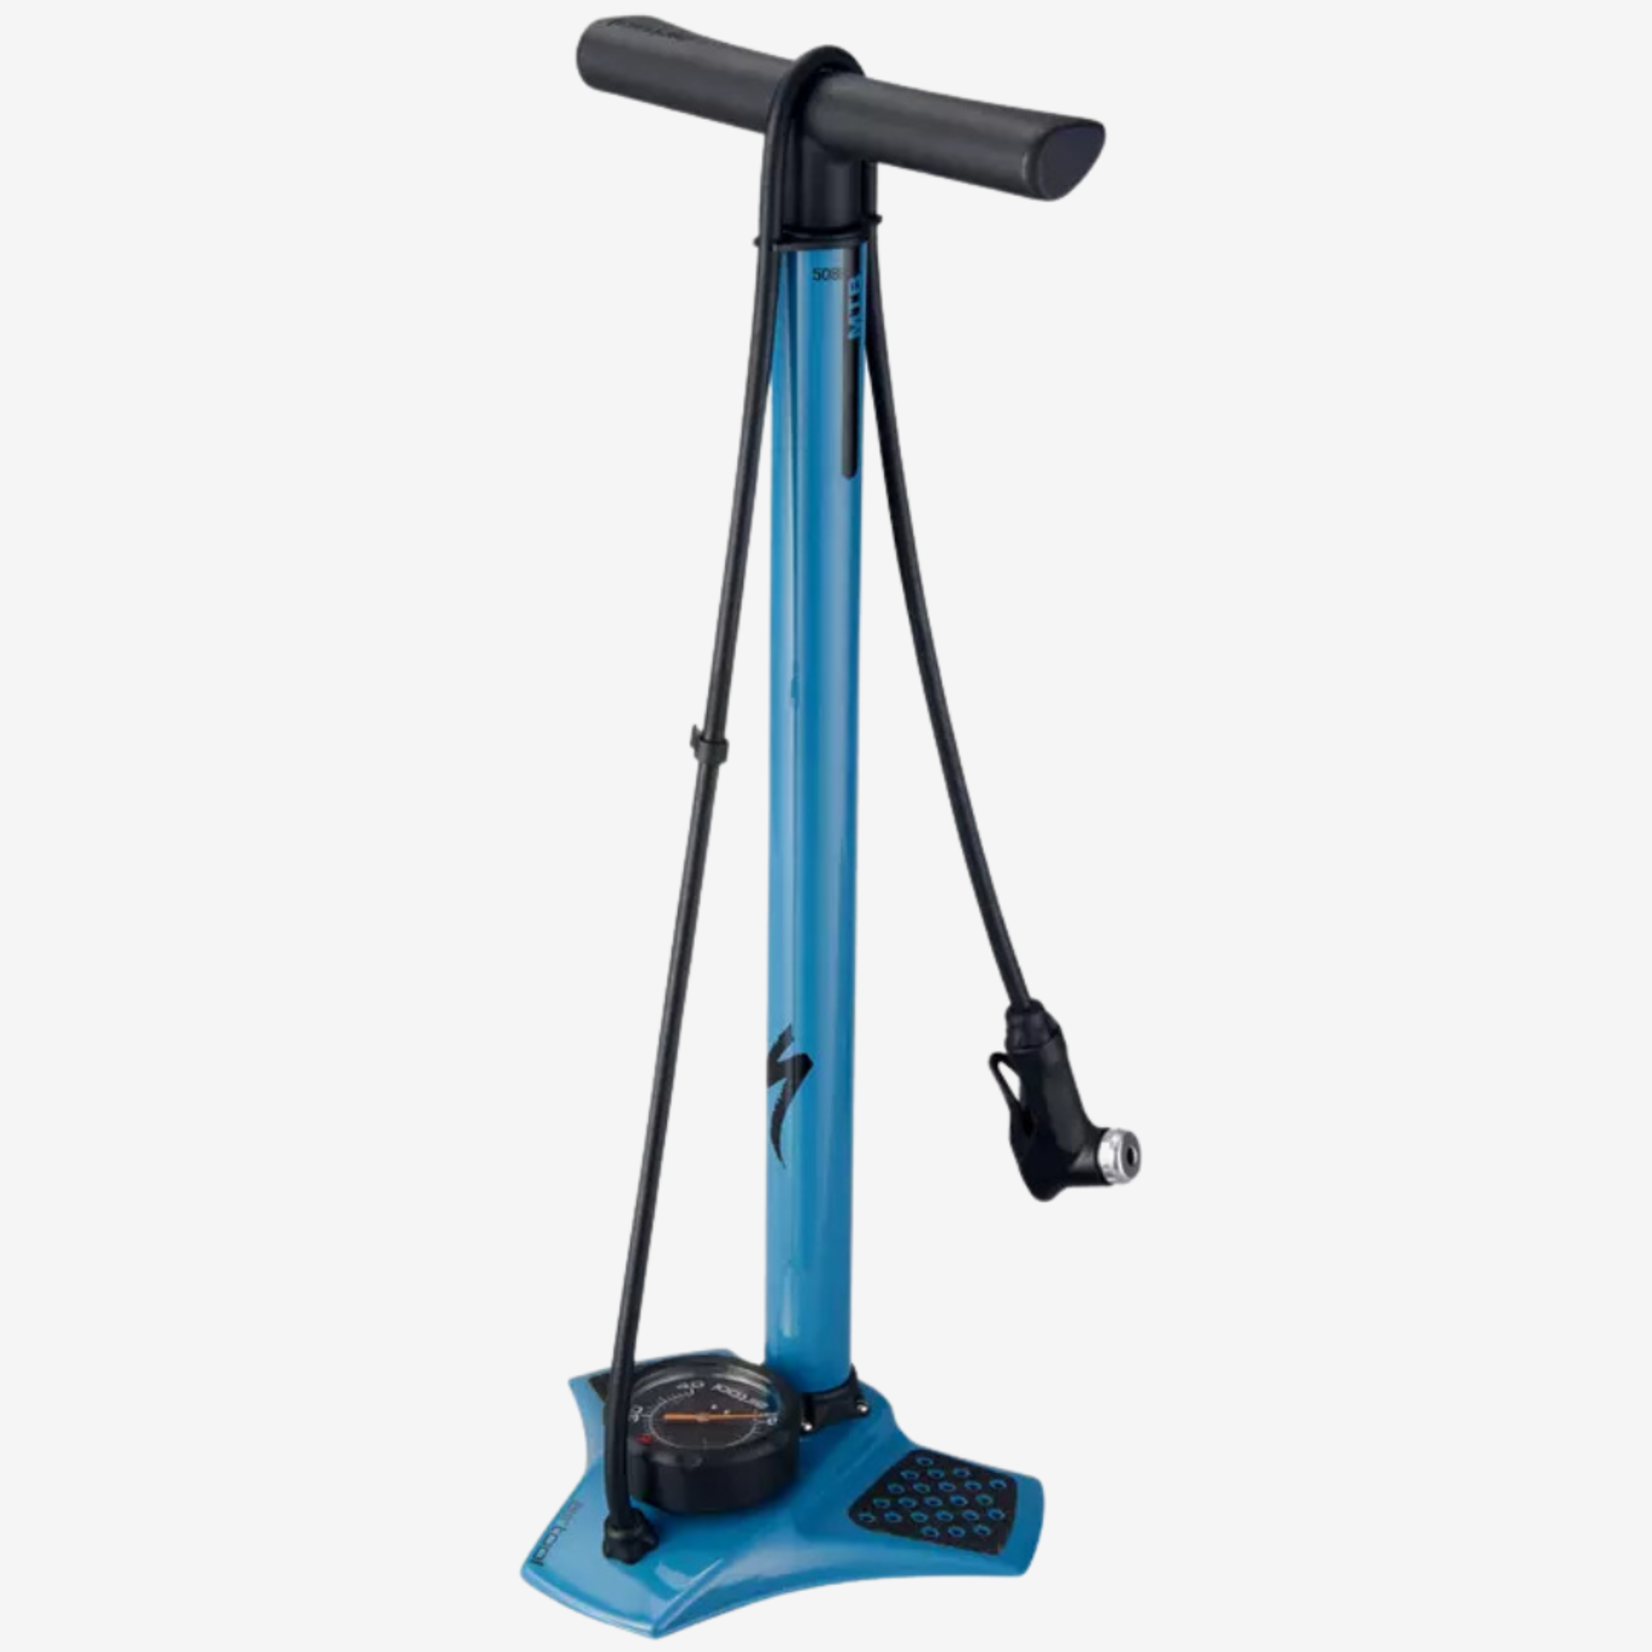 SPECIALIZED AIR TOOL MOUNTAIN BIKE FLOOR PUMP